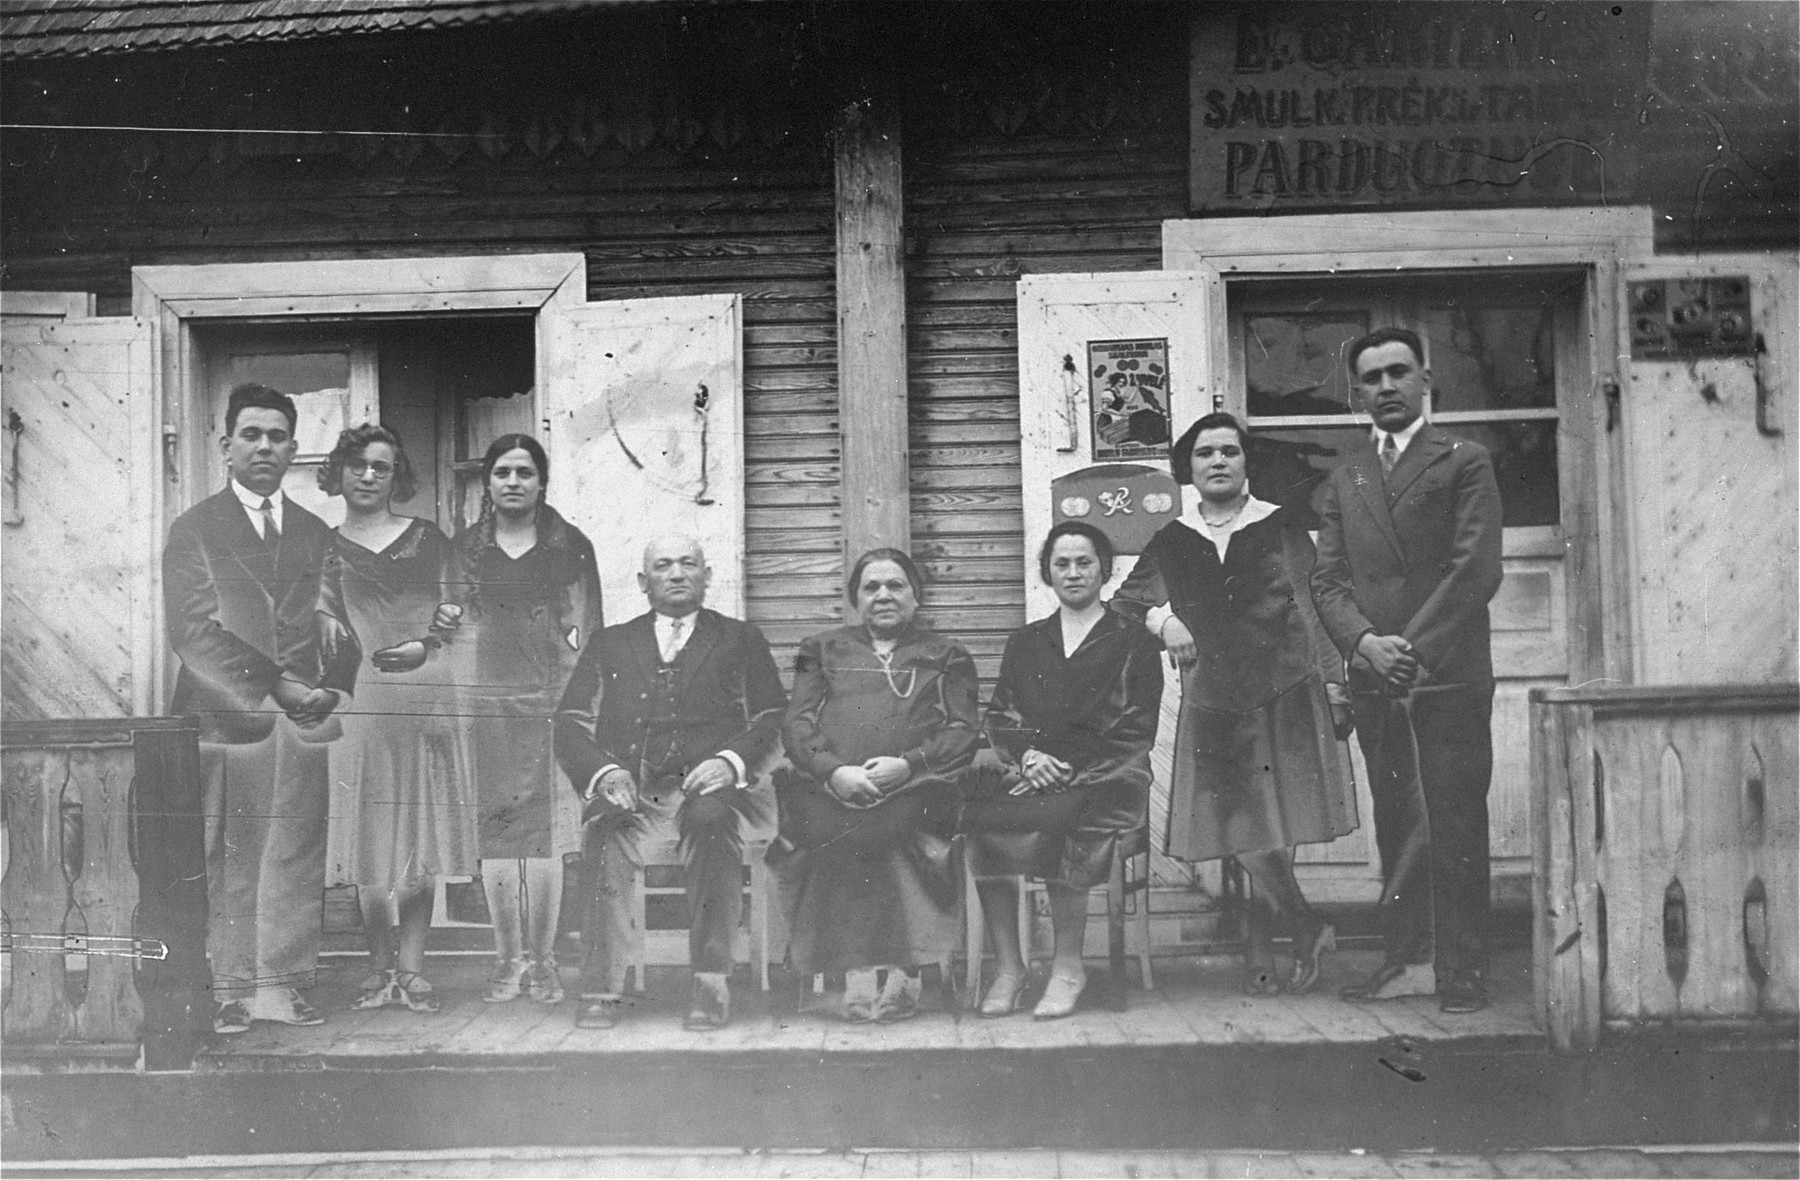 Group portrait of the Gar family in front of the grandmother's home in Kron, Lithuania.

Pictured from left to right are: Joseph Gar, unknown, unknown;  David Gar; Esther Gar; unknown, Chaya Gar; Jacob Gar.